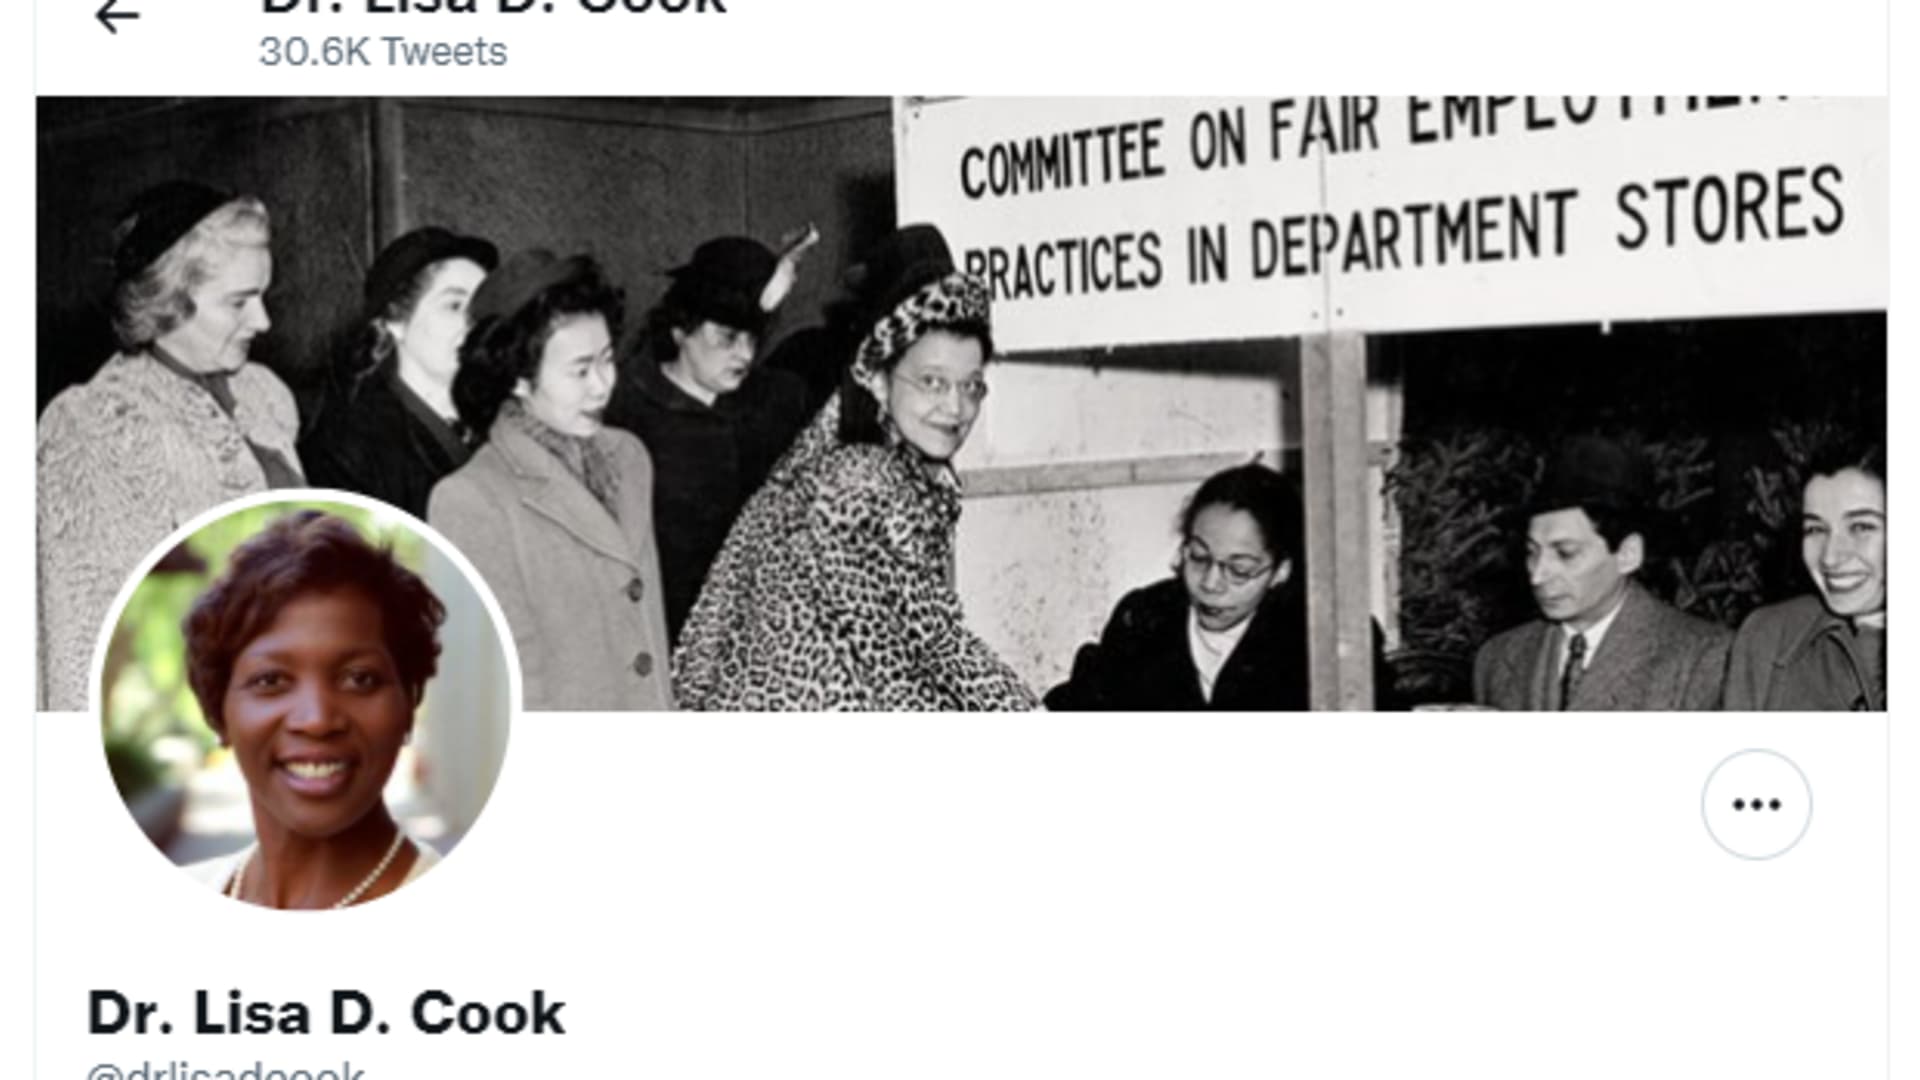 A tweet from the Senate Banking GOP account appears to show that Cook blocked the Republican committee's access to her social media posts on Twitter.